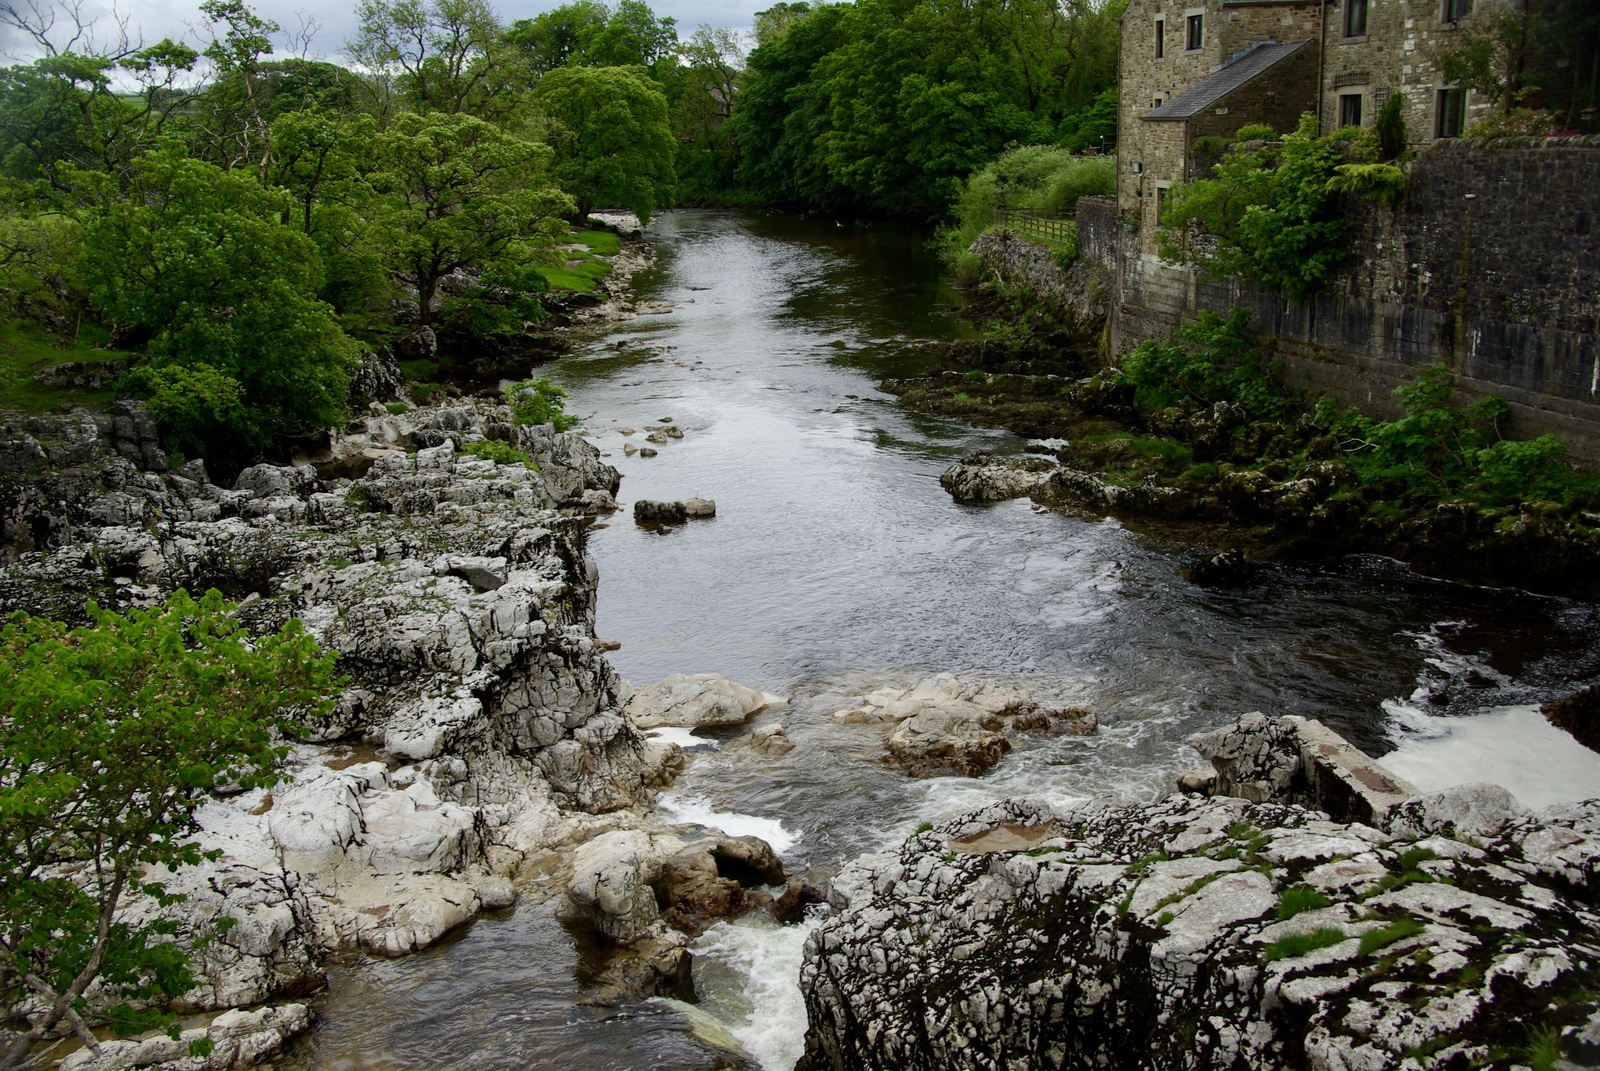 Image of Linton Falls and Weir by Nigel Shaw